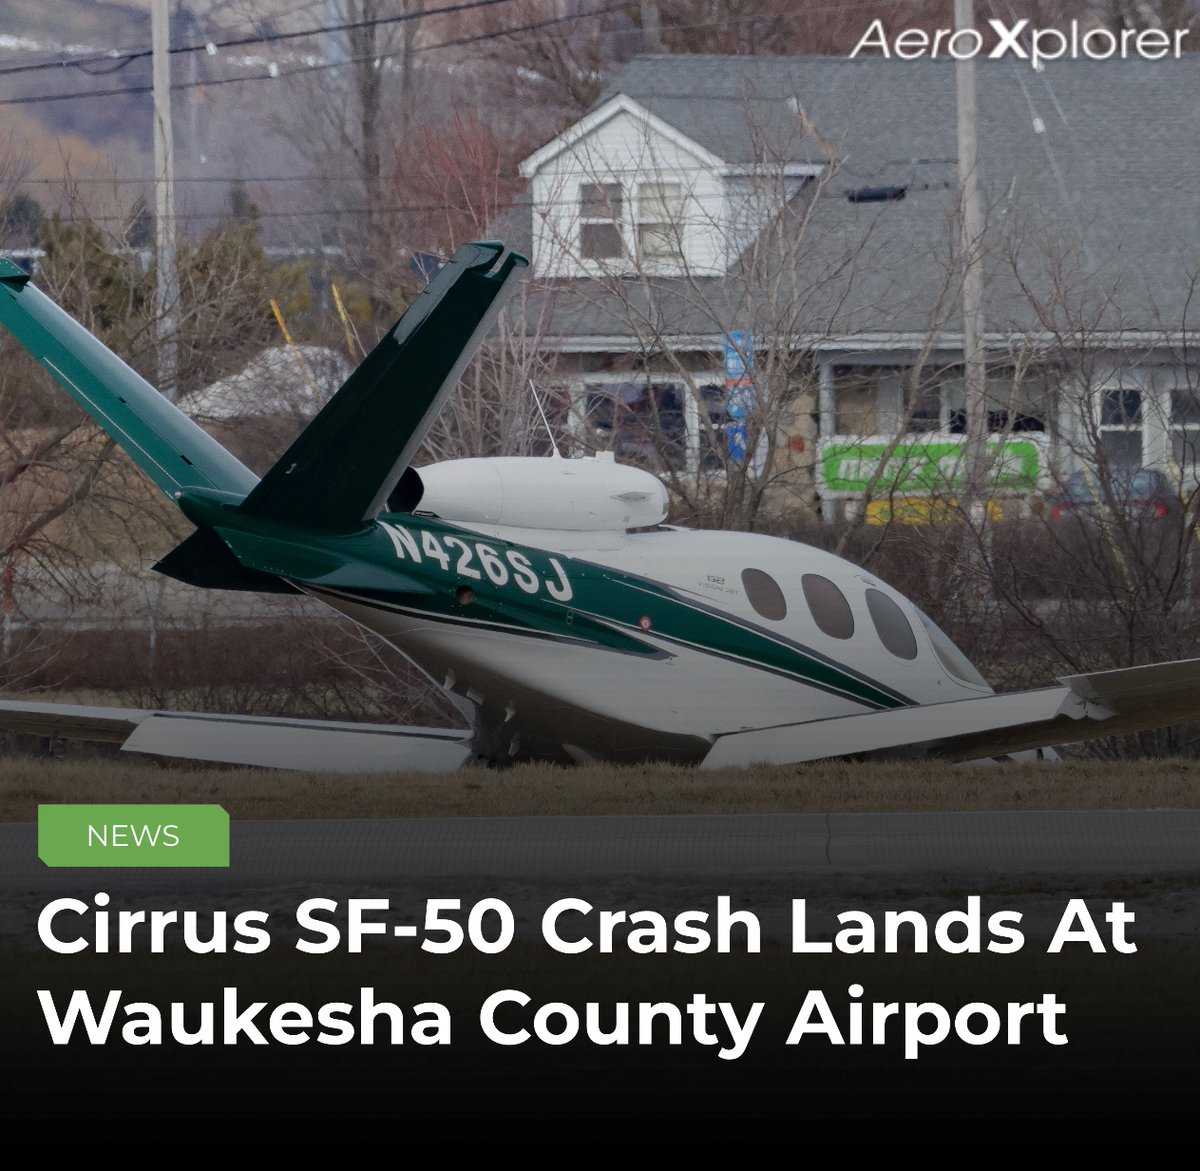 Yesterday, a Cirrus Vision jet experienced a runway excursion when it made an emergency landing at Waukesha County Airport (KUES). The incident occurred at 9:57 am local time shortly after N426SJ departed runway 28. 

📸: AJ R. | AeroXplorer

#cirrusjet #cirrusaircraft #sf50